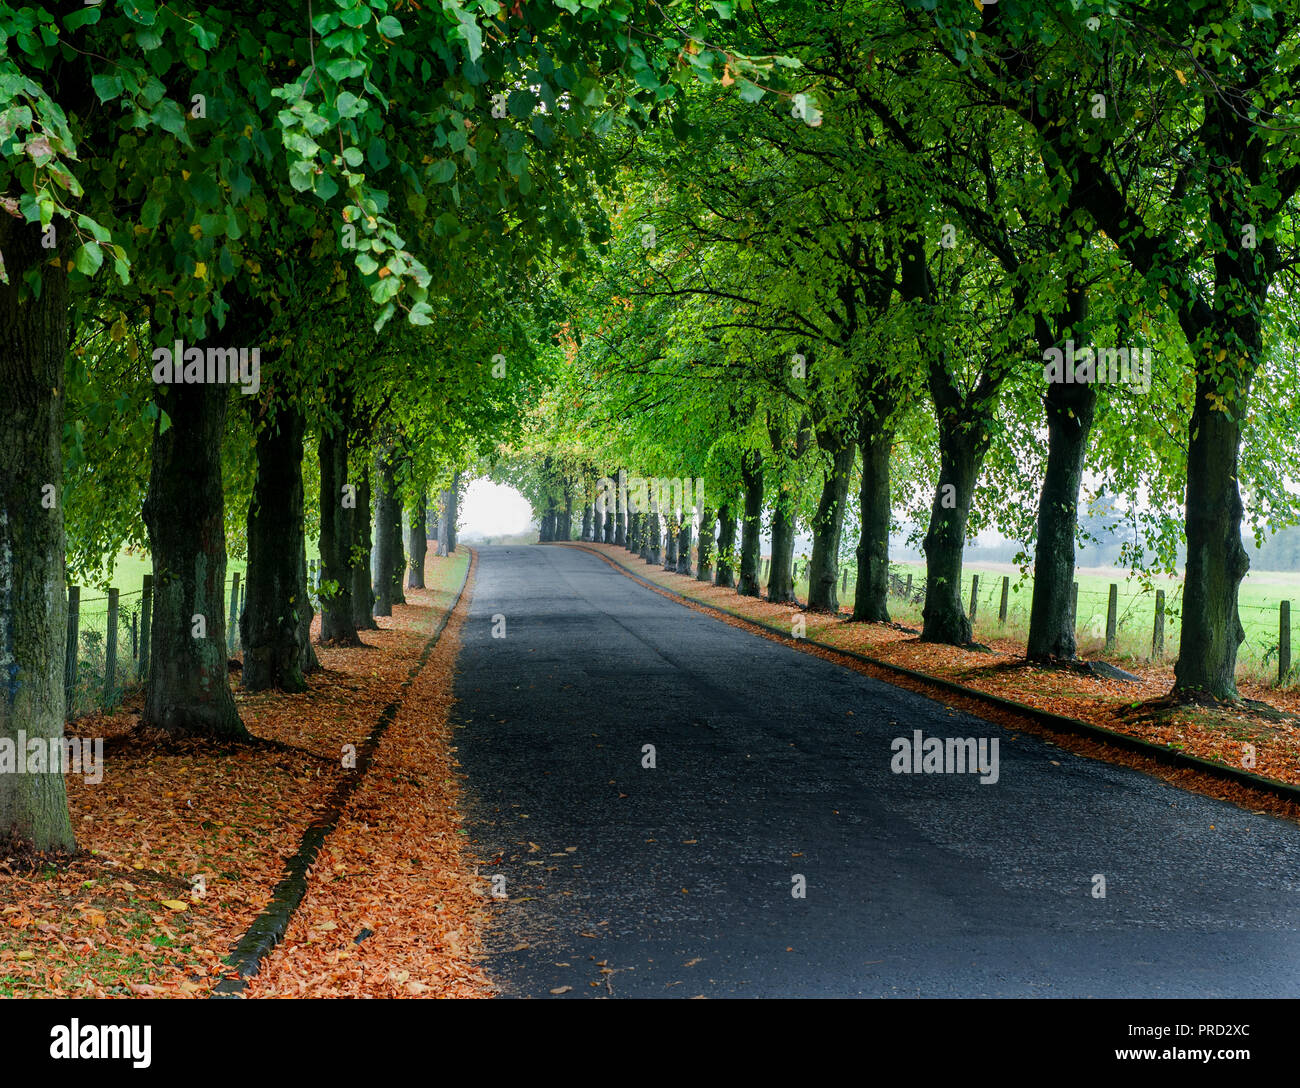 A road lined with trees with leaves on the ground. Stock Photo